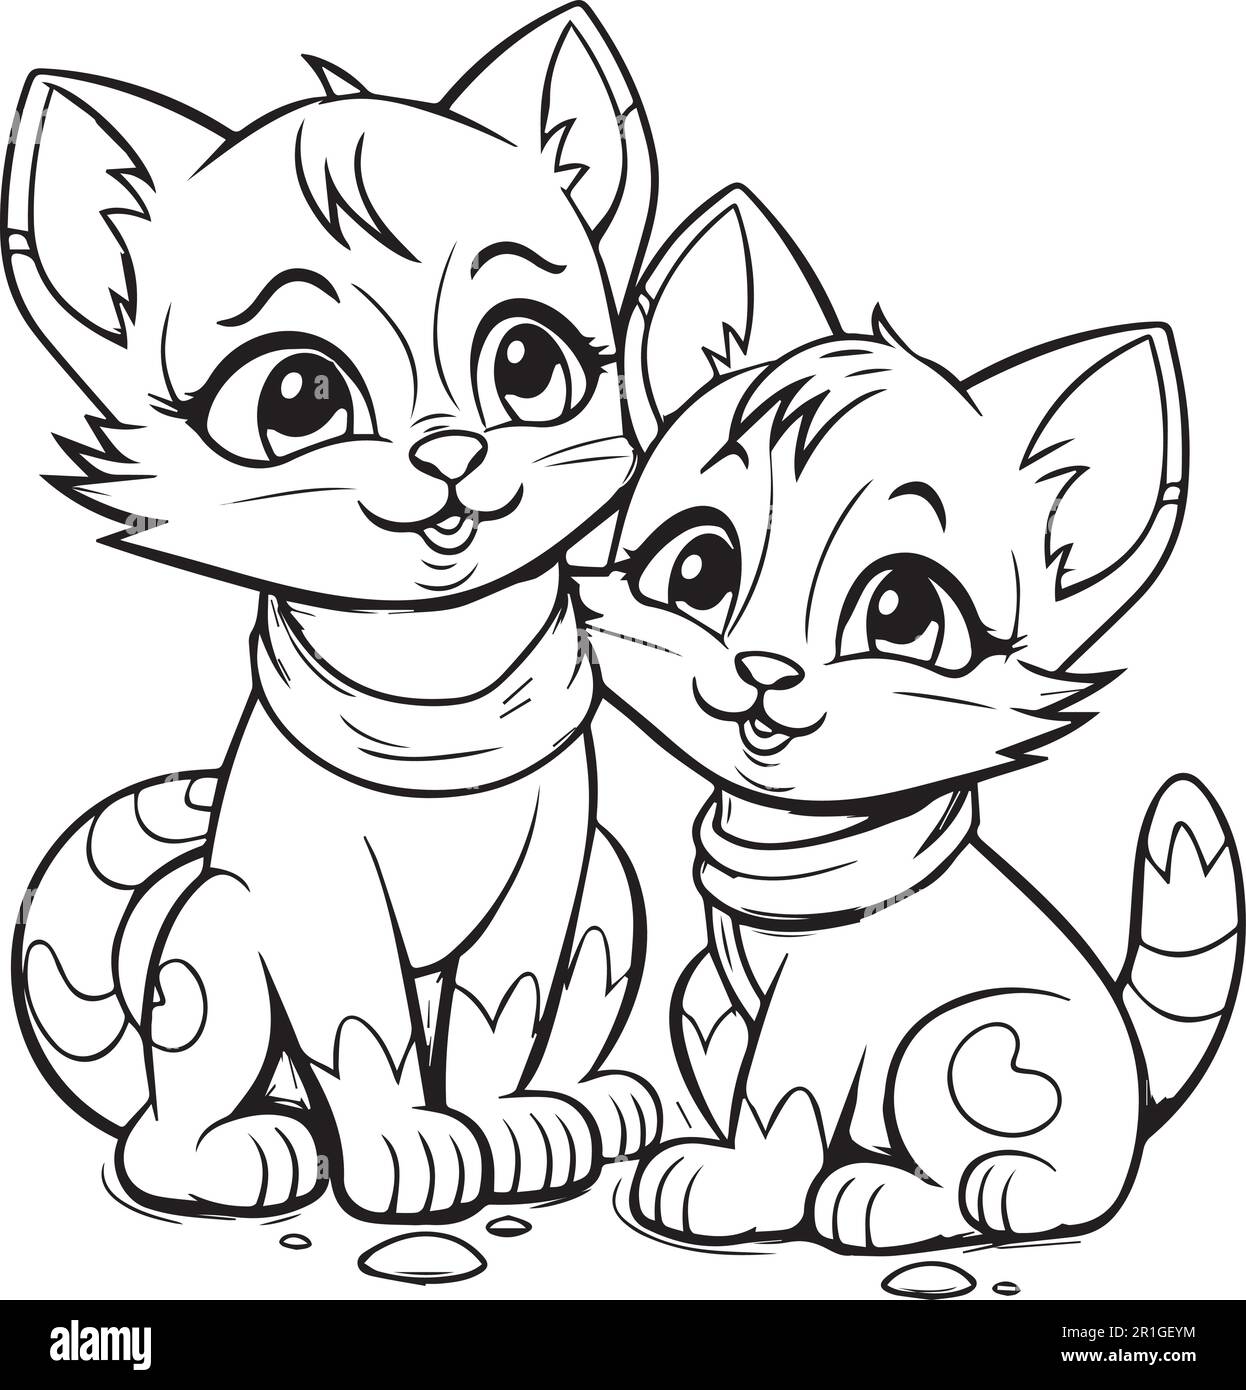 Two kittens sitting coloring book page illustration. Stock Vector